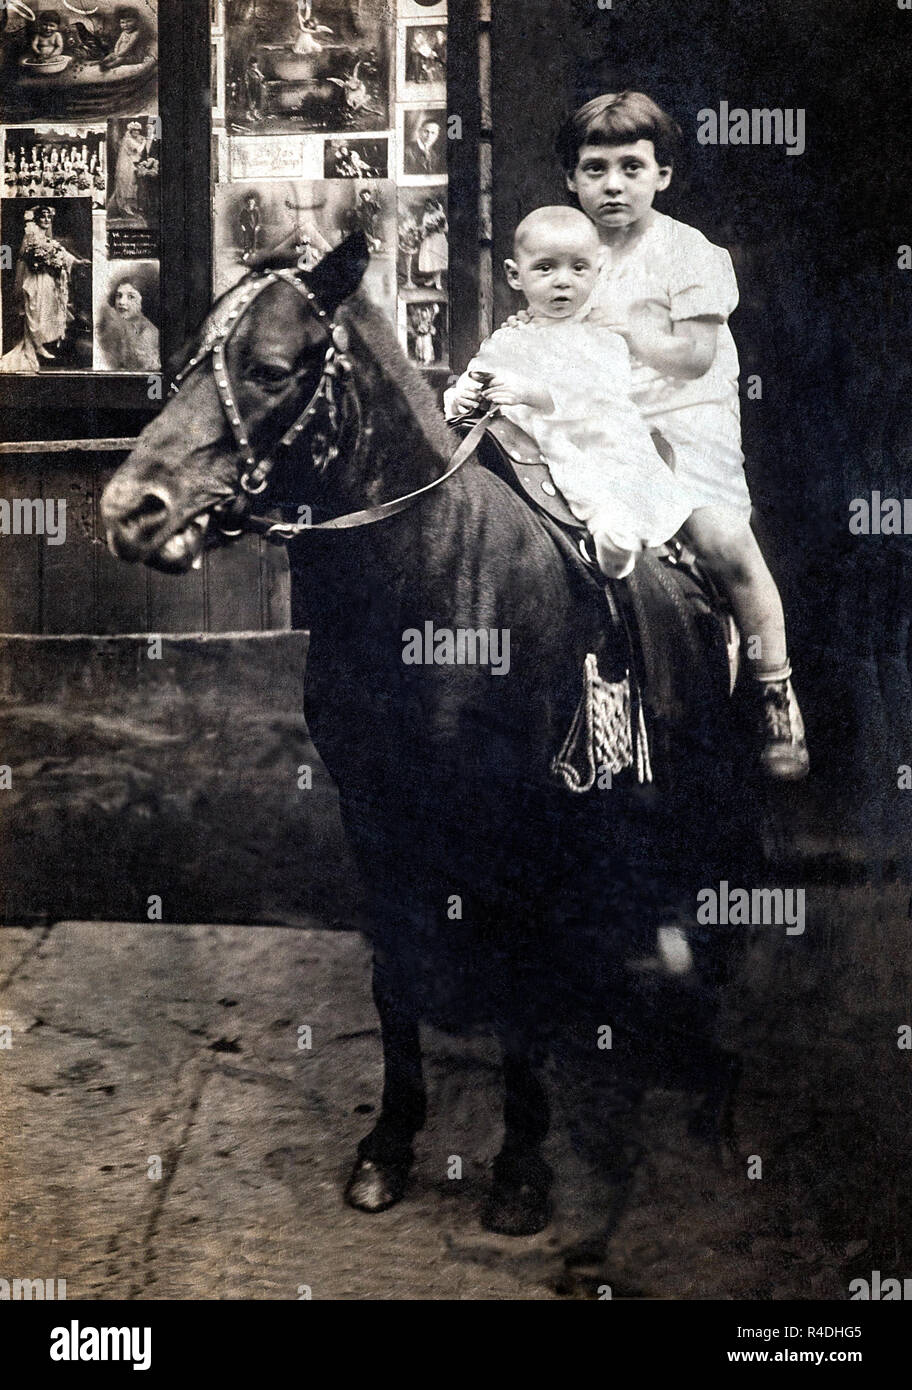 Two brothers on a pony in New York outside a movie theatre, circa 1922. Stock Photo